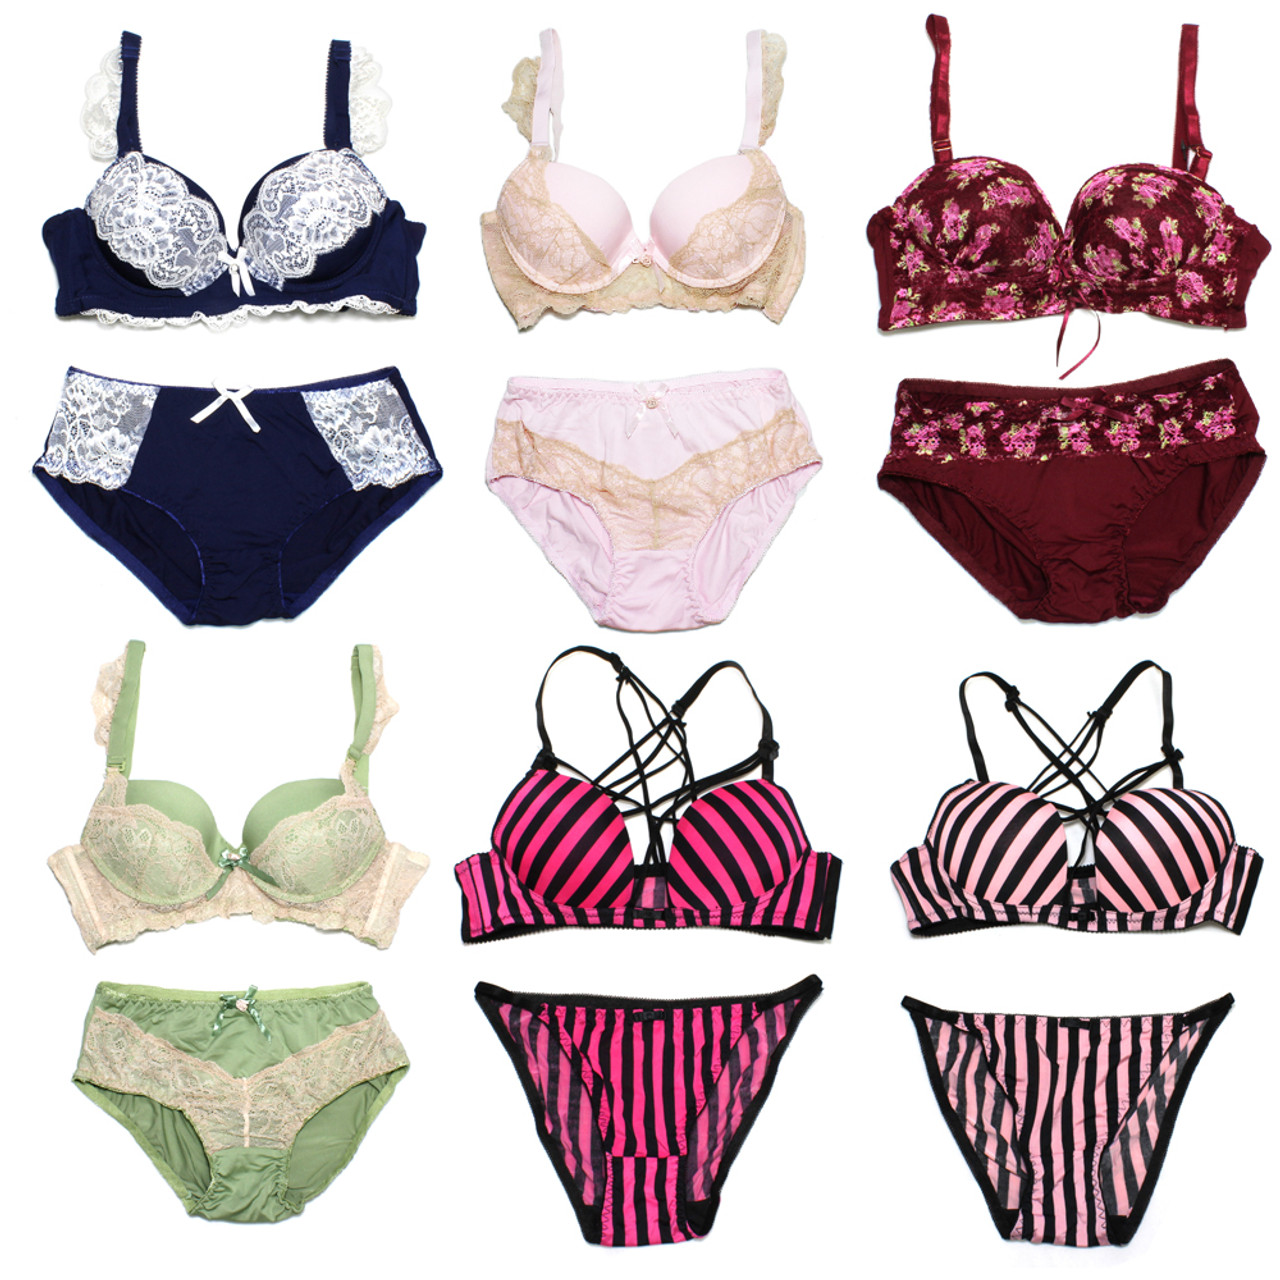 Wholesale size bra pictures For Supportive Underwear 